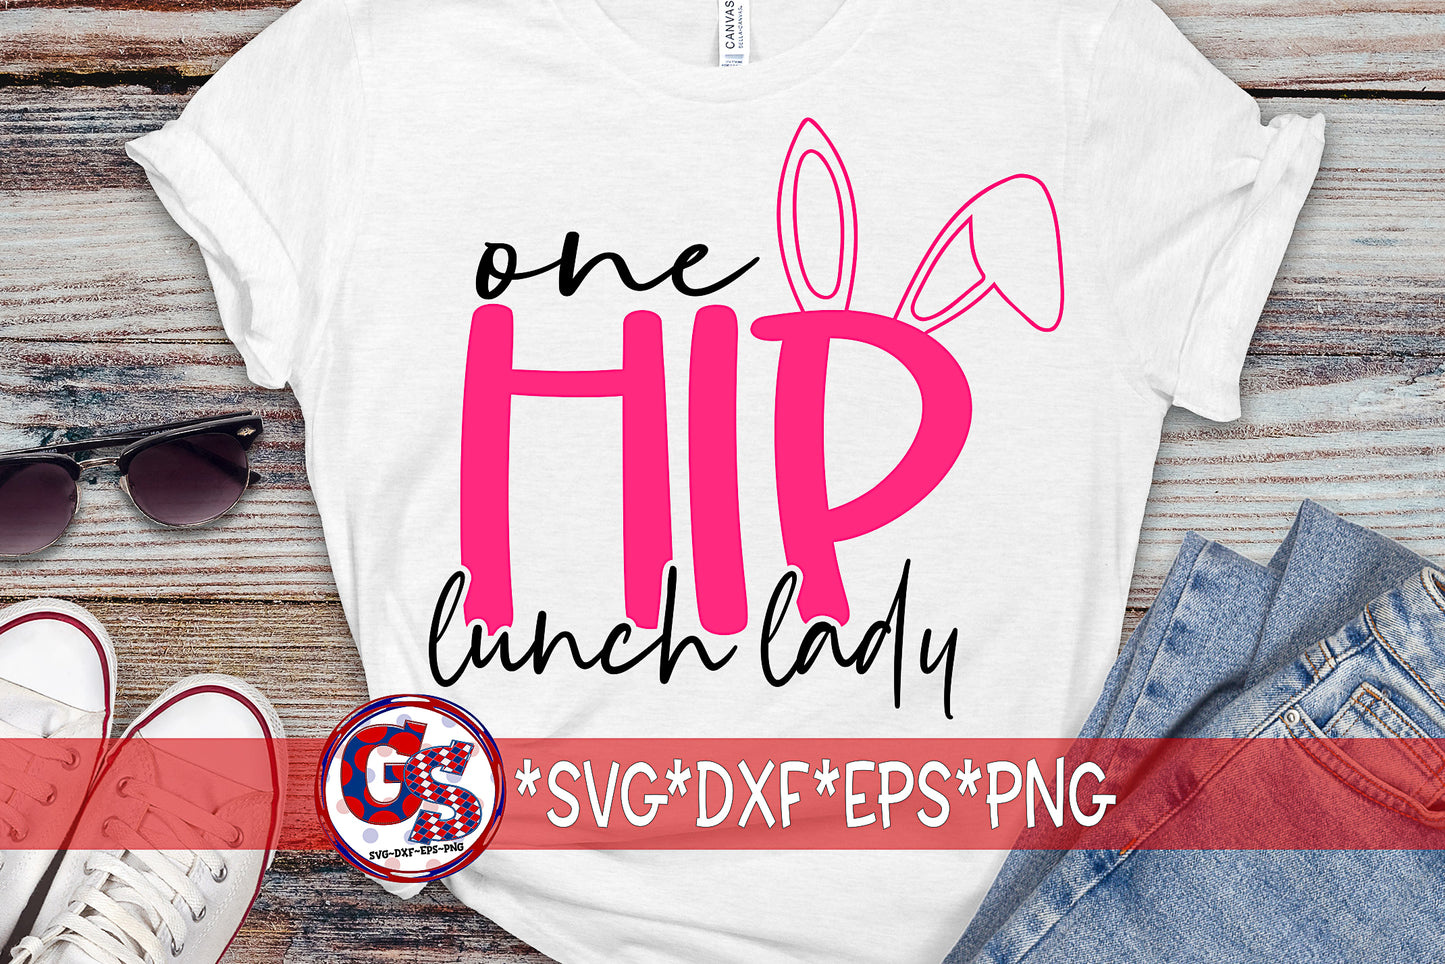 One Hip Lunch Lady SVG DXF EPS PNG